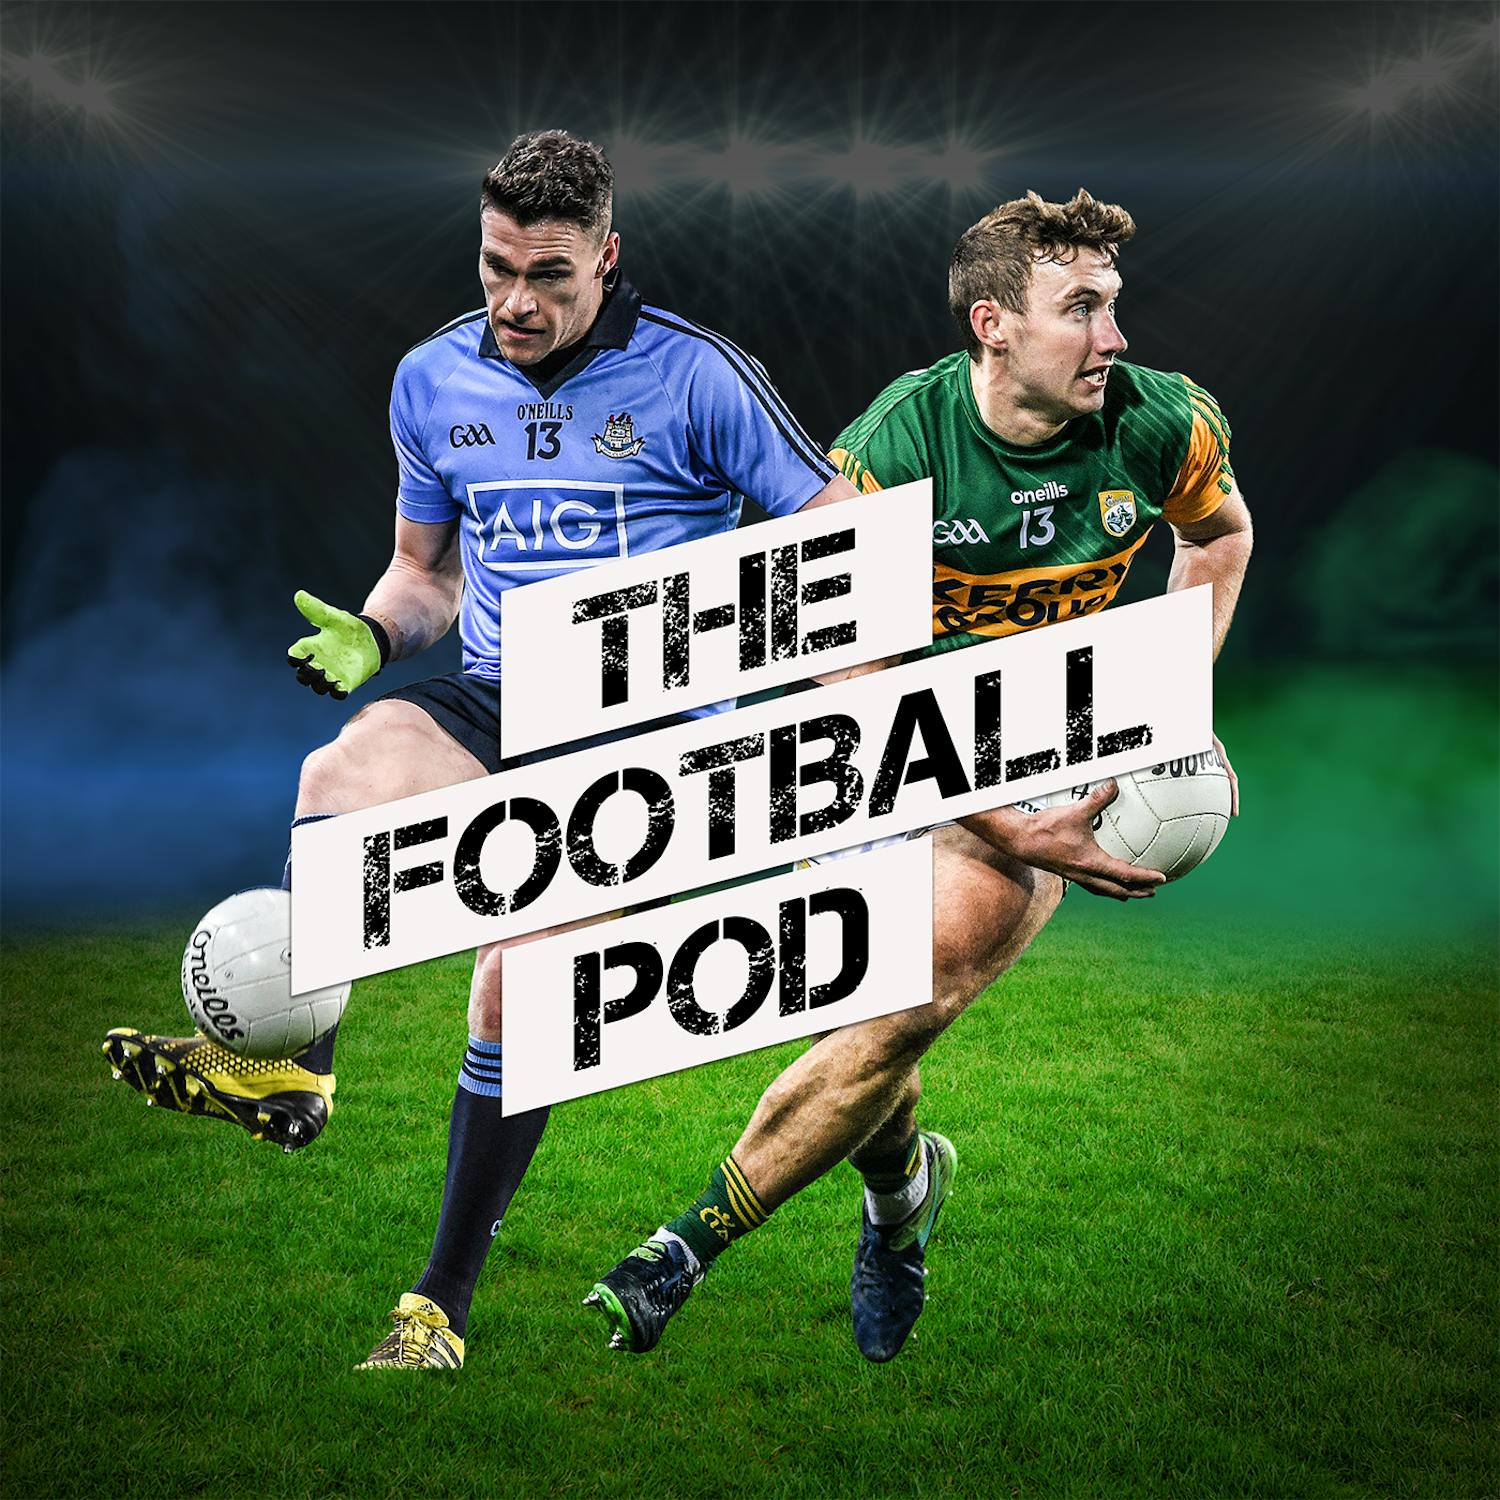 TFP - Ep. 2: Dublin’s trouble and solutions, Clutch shooters, Gooch advice, Around the Grounds